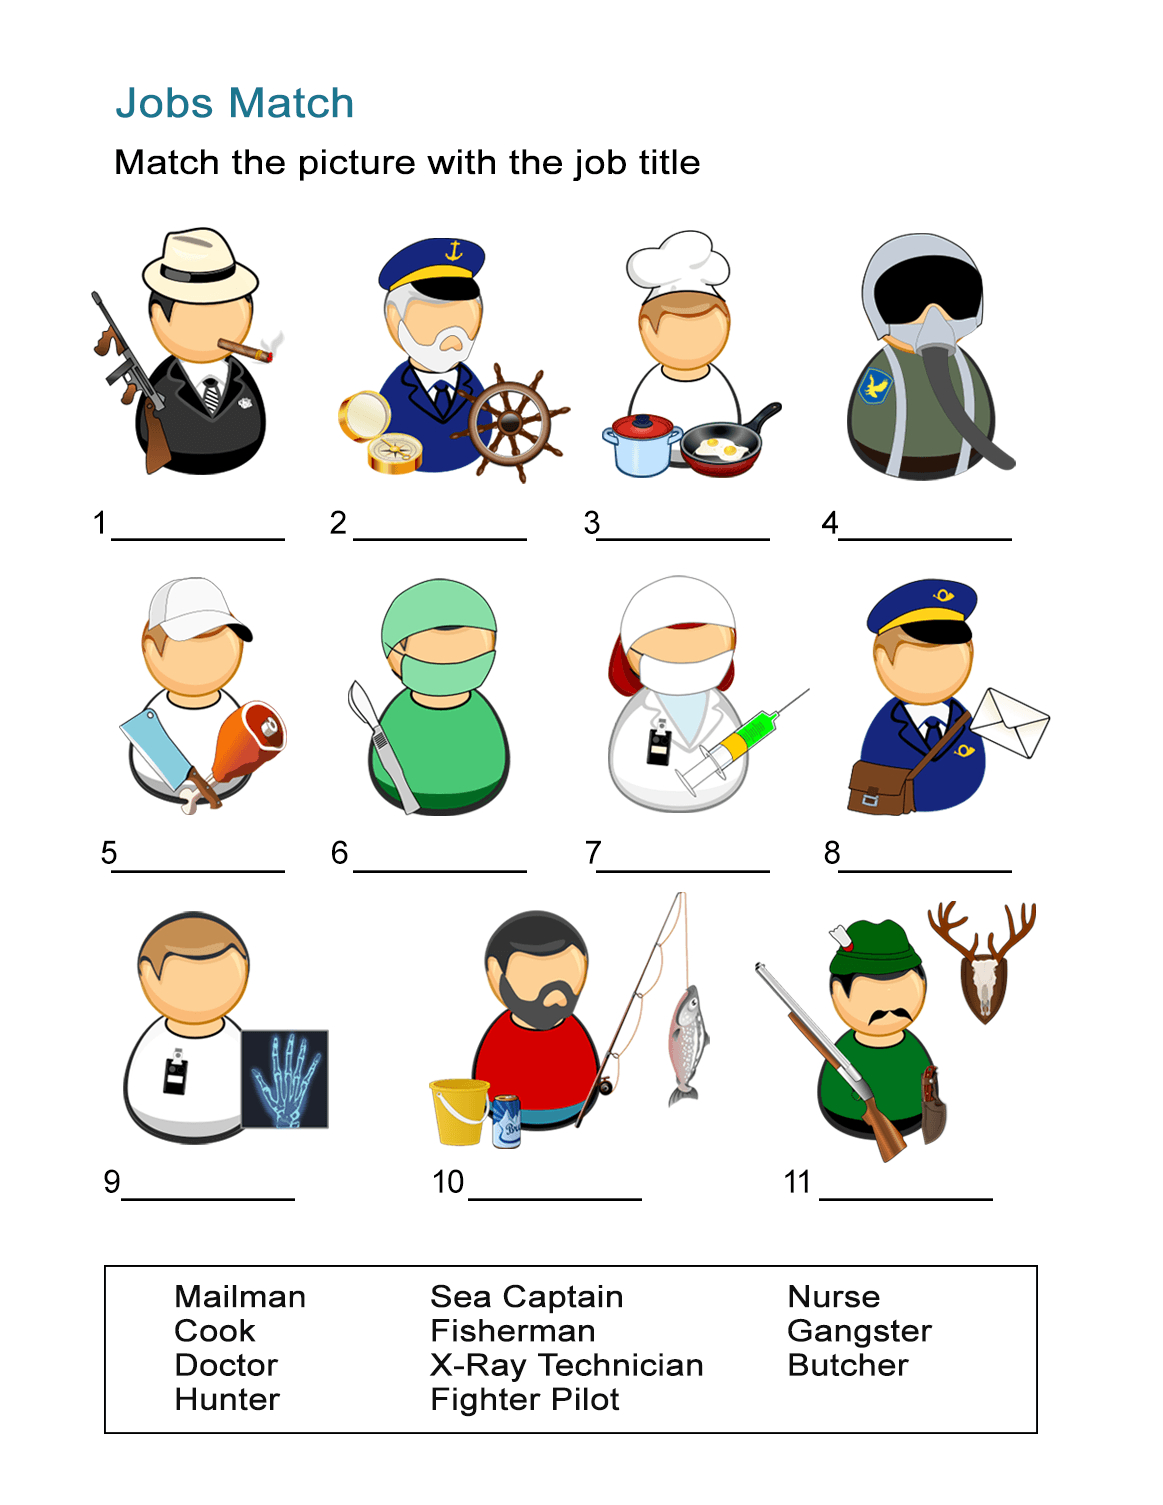 List Of Common Occupations Worksheet: Match The Jobs And Pictures - Free Printable Worksheets Jobs